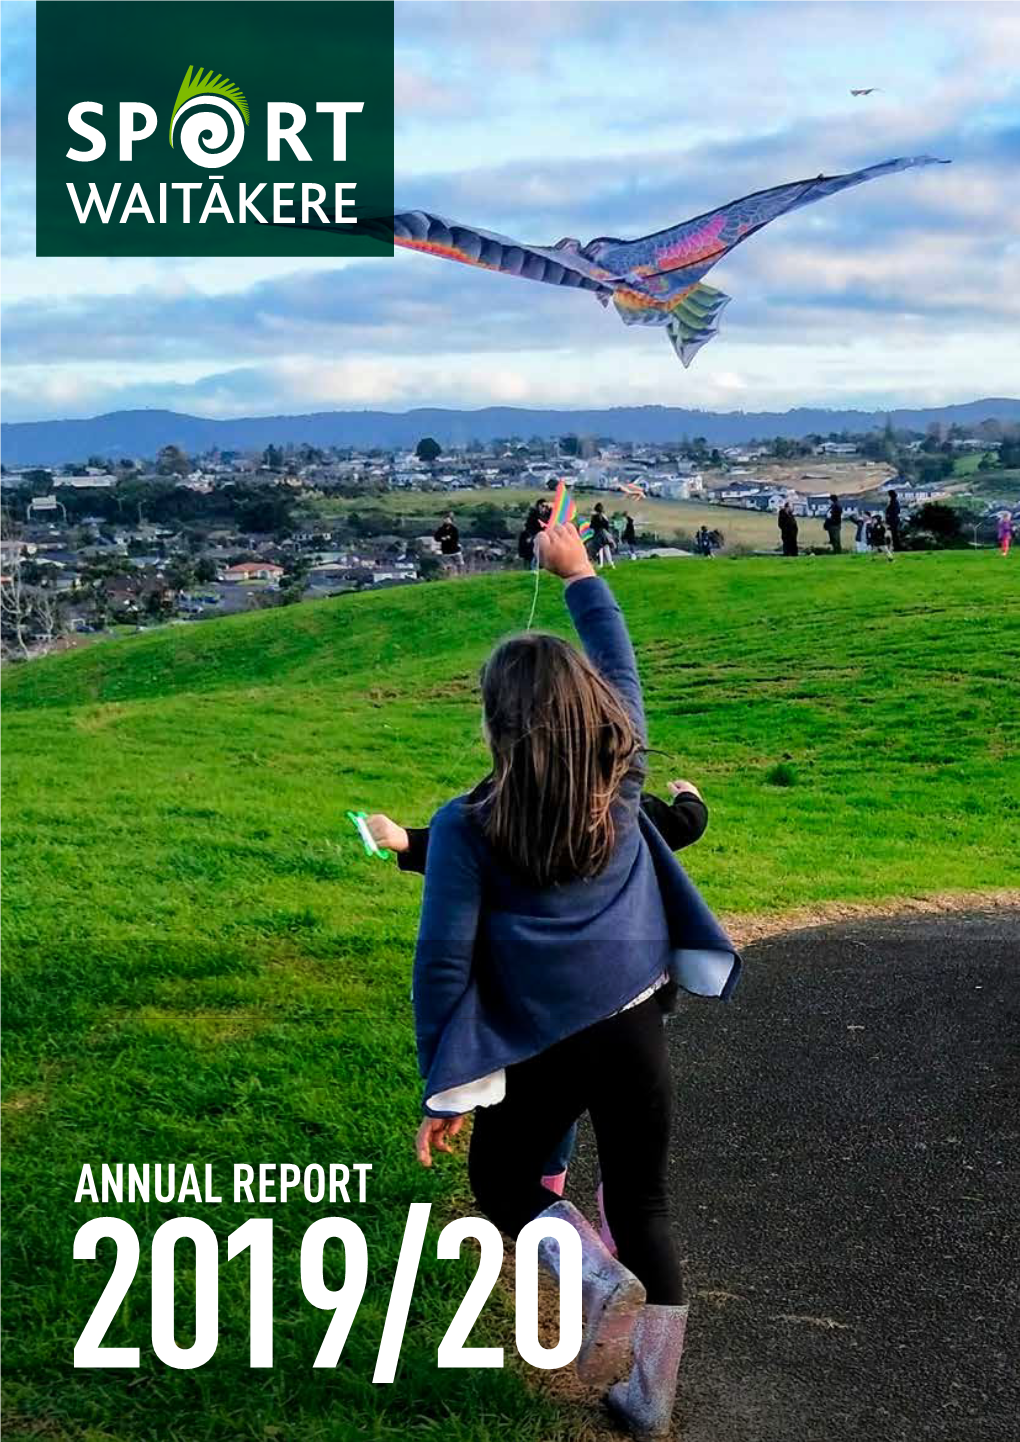 ANNUAL REPORT 2019/20 Sport Waitākere Aims to Make a Positive Difference in the Lives of People in West Auckland